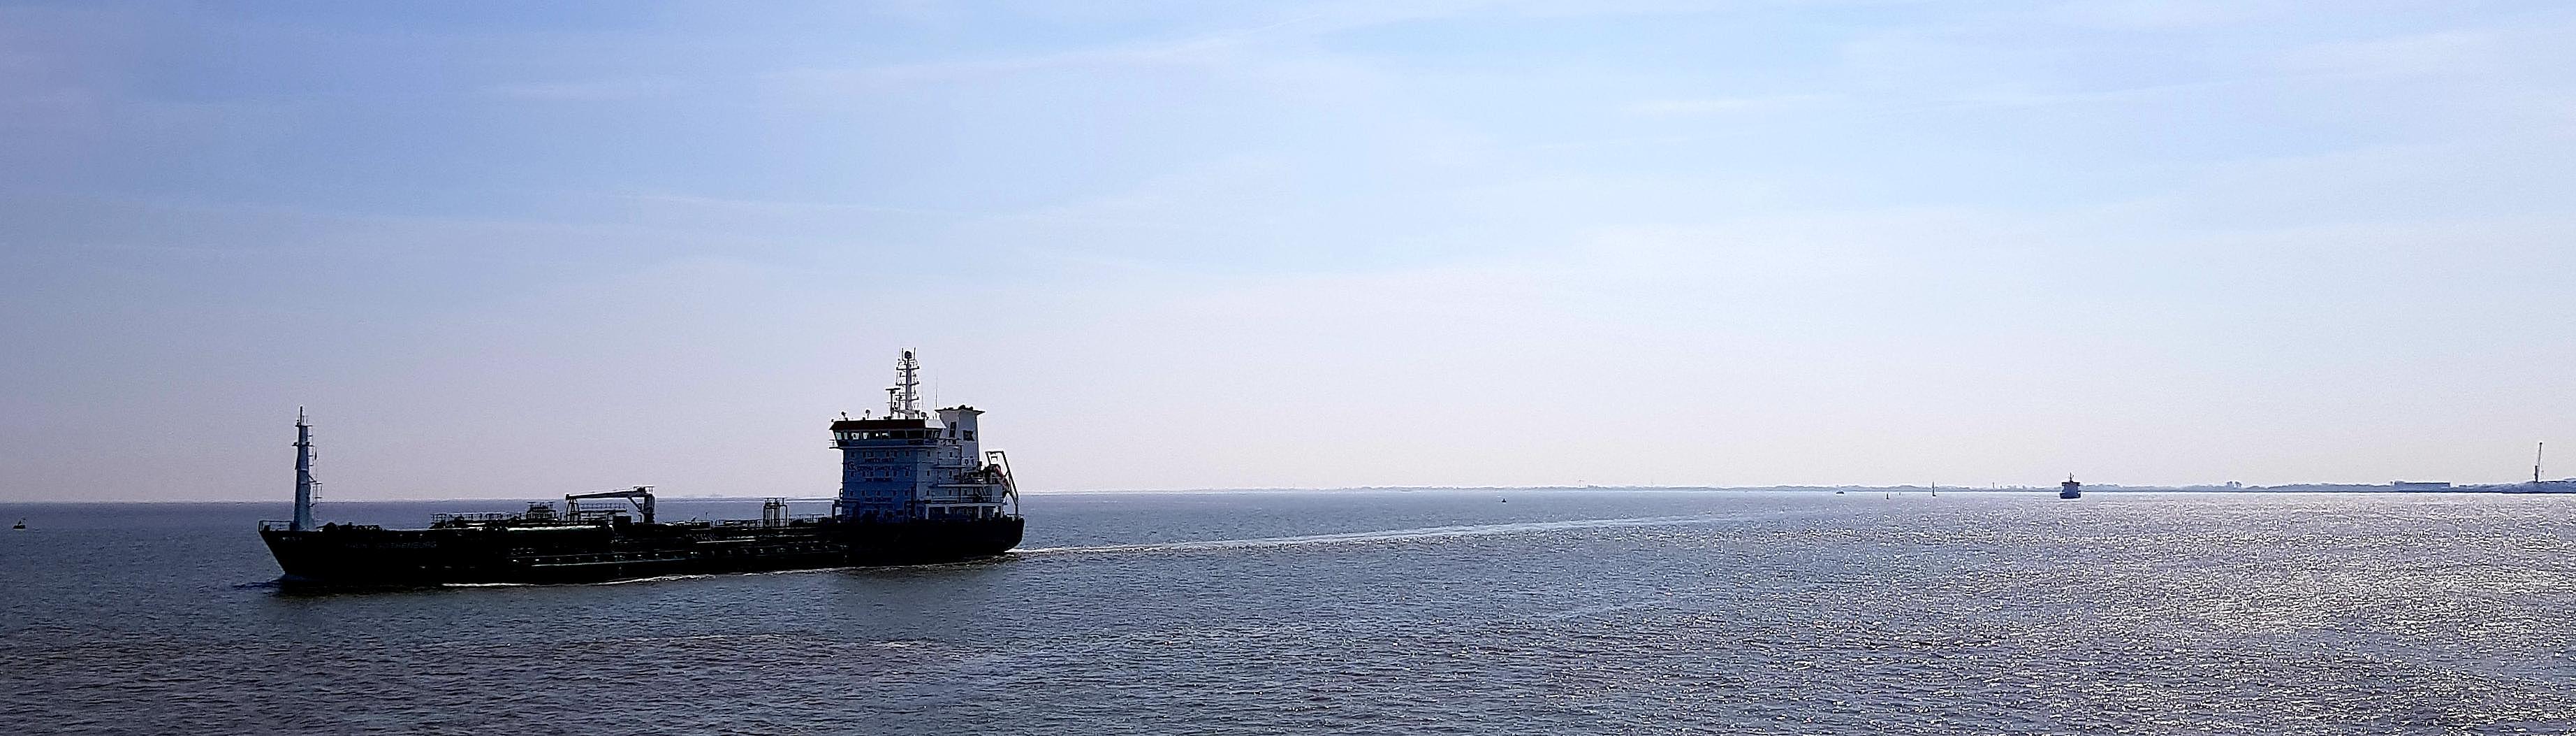 shipspotting on the Elbe: Containership